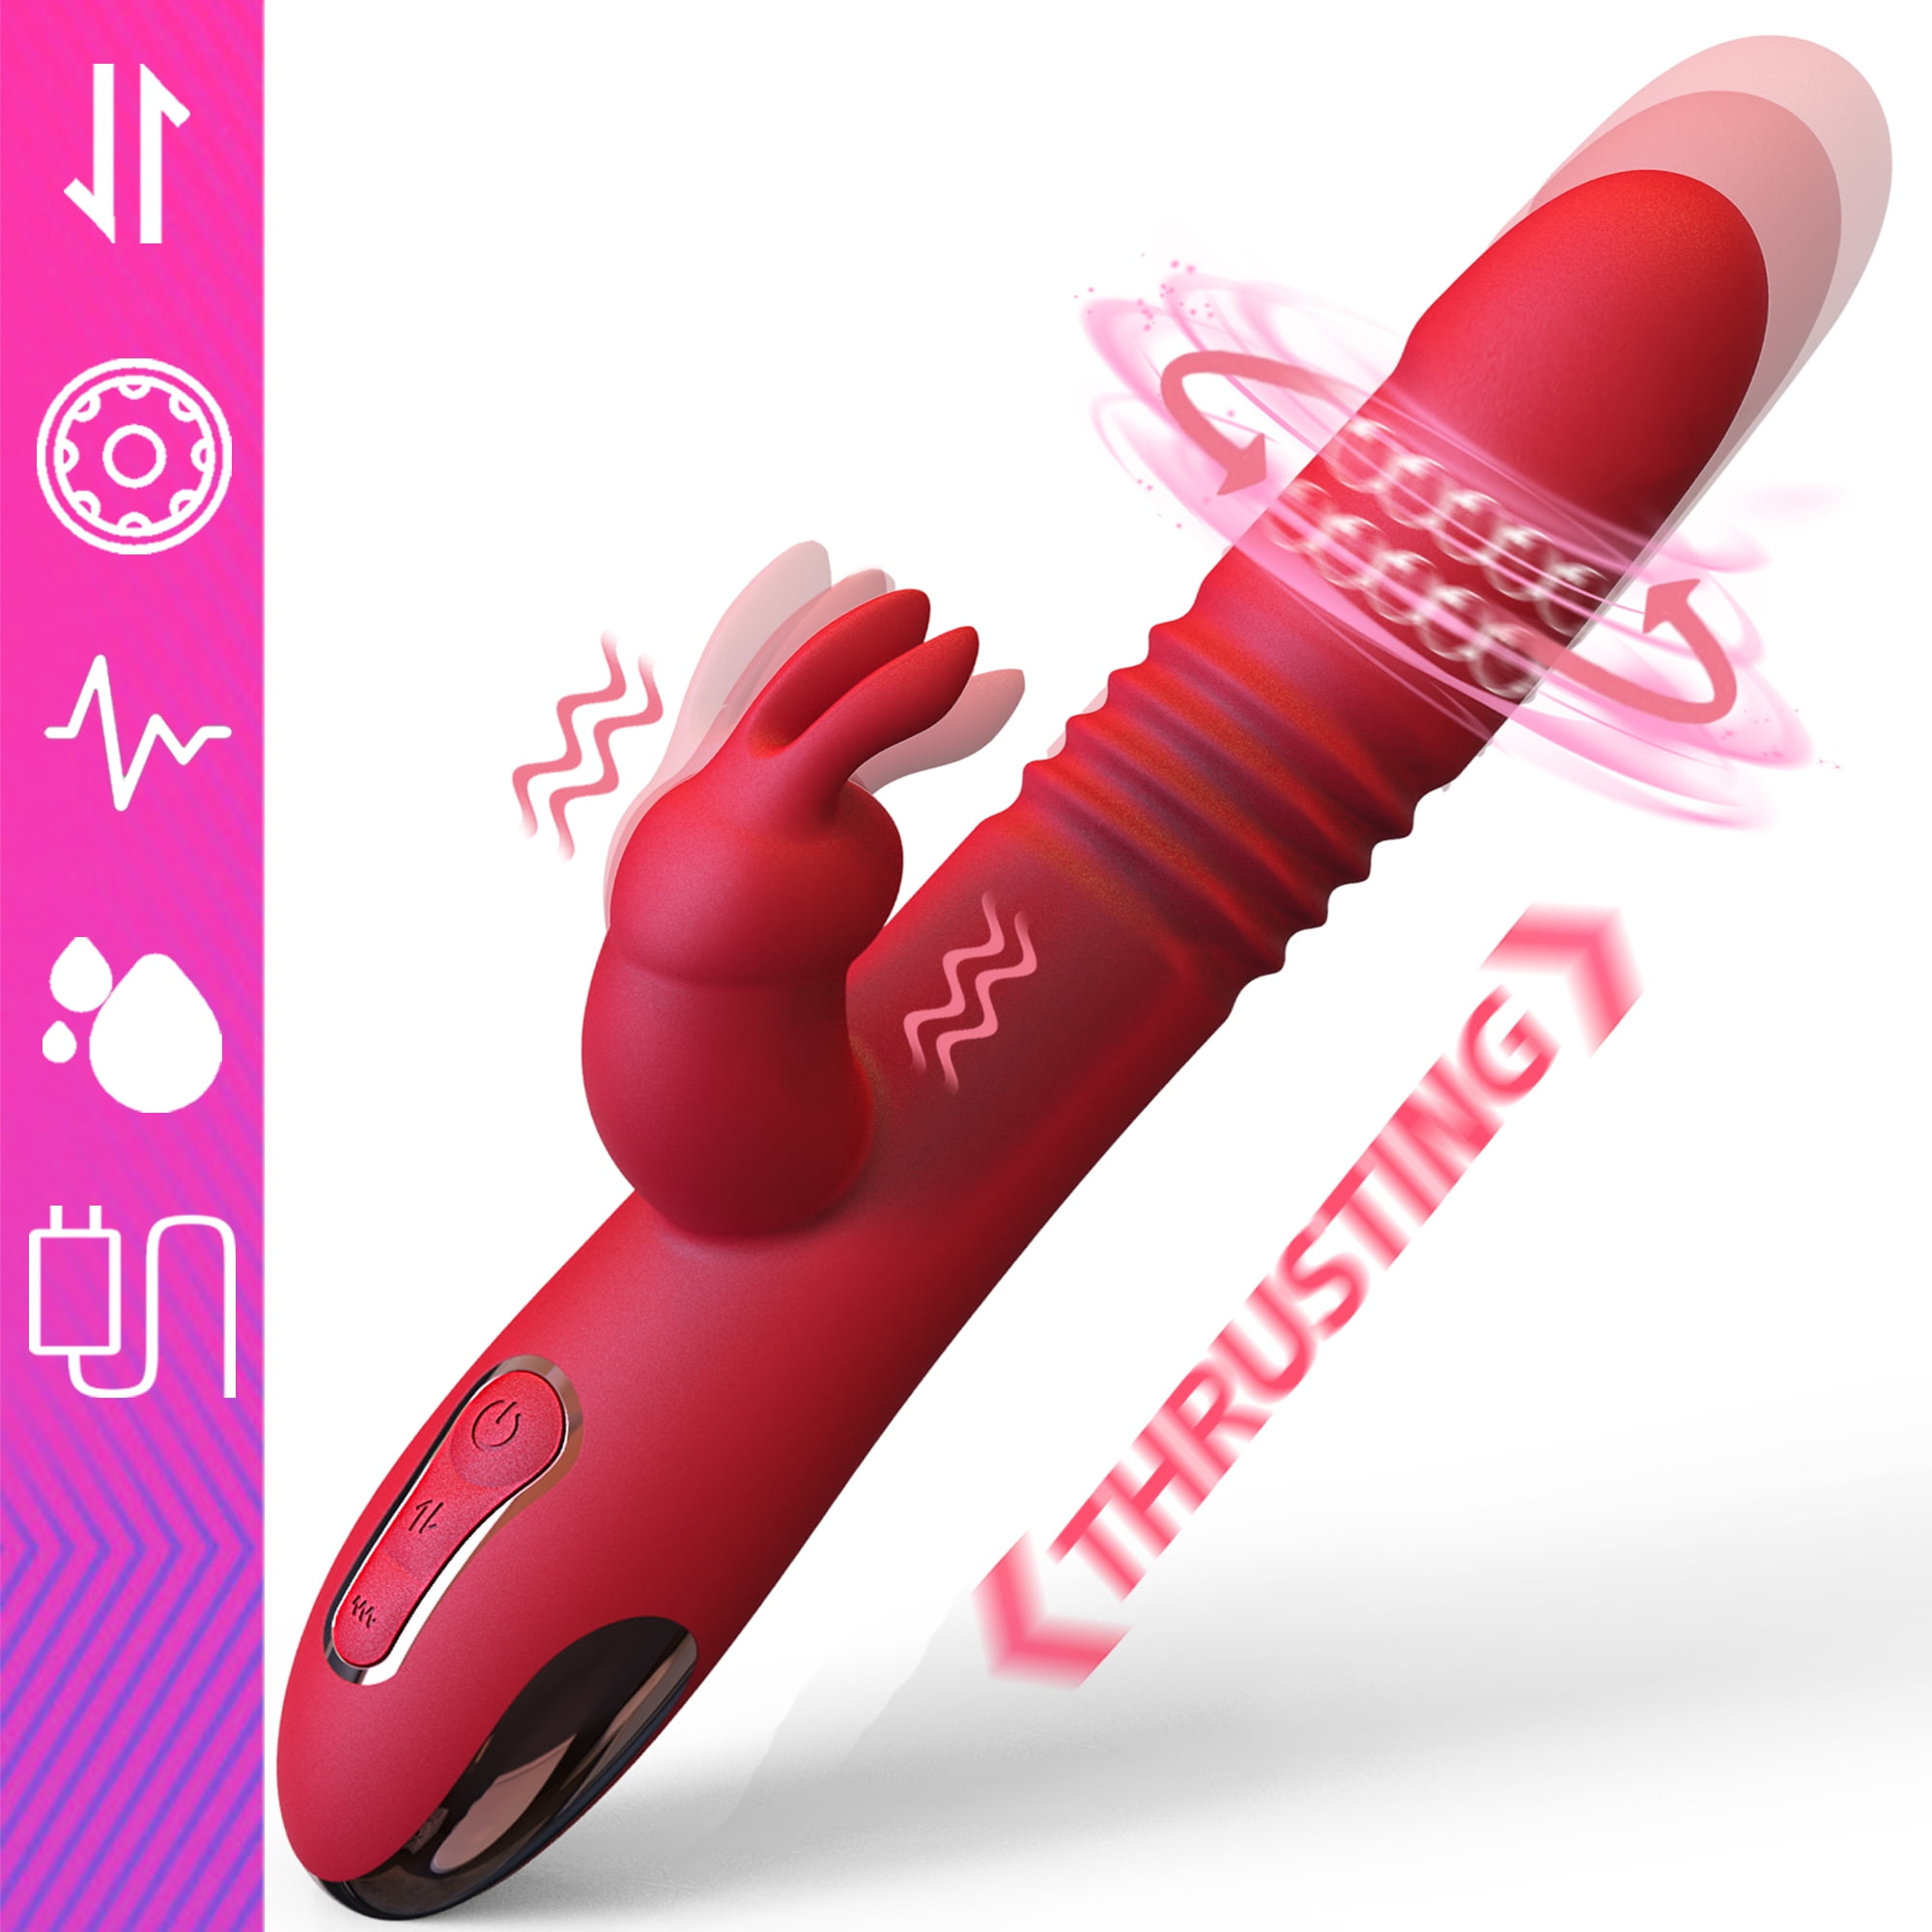 Erifxes Sex Toys Thrusting Rabbit Vibrator for Women, Rotating Sex Toy with Beads,Triple Stimulating Adult Toy, Clitoral G-spot Stimulator Massager for Women Pleasure Couples Sexual Games